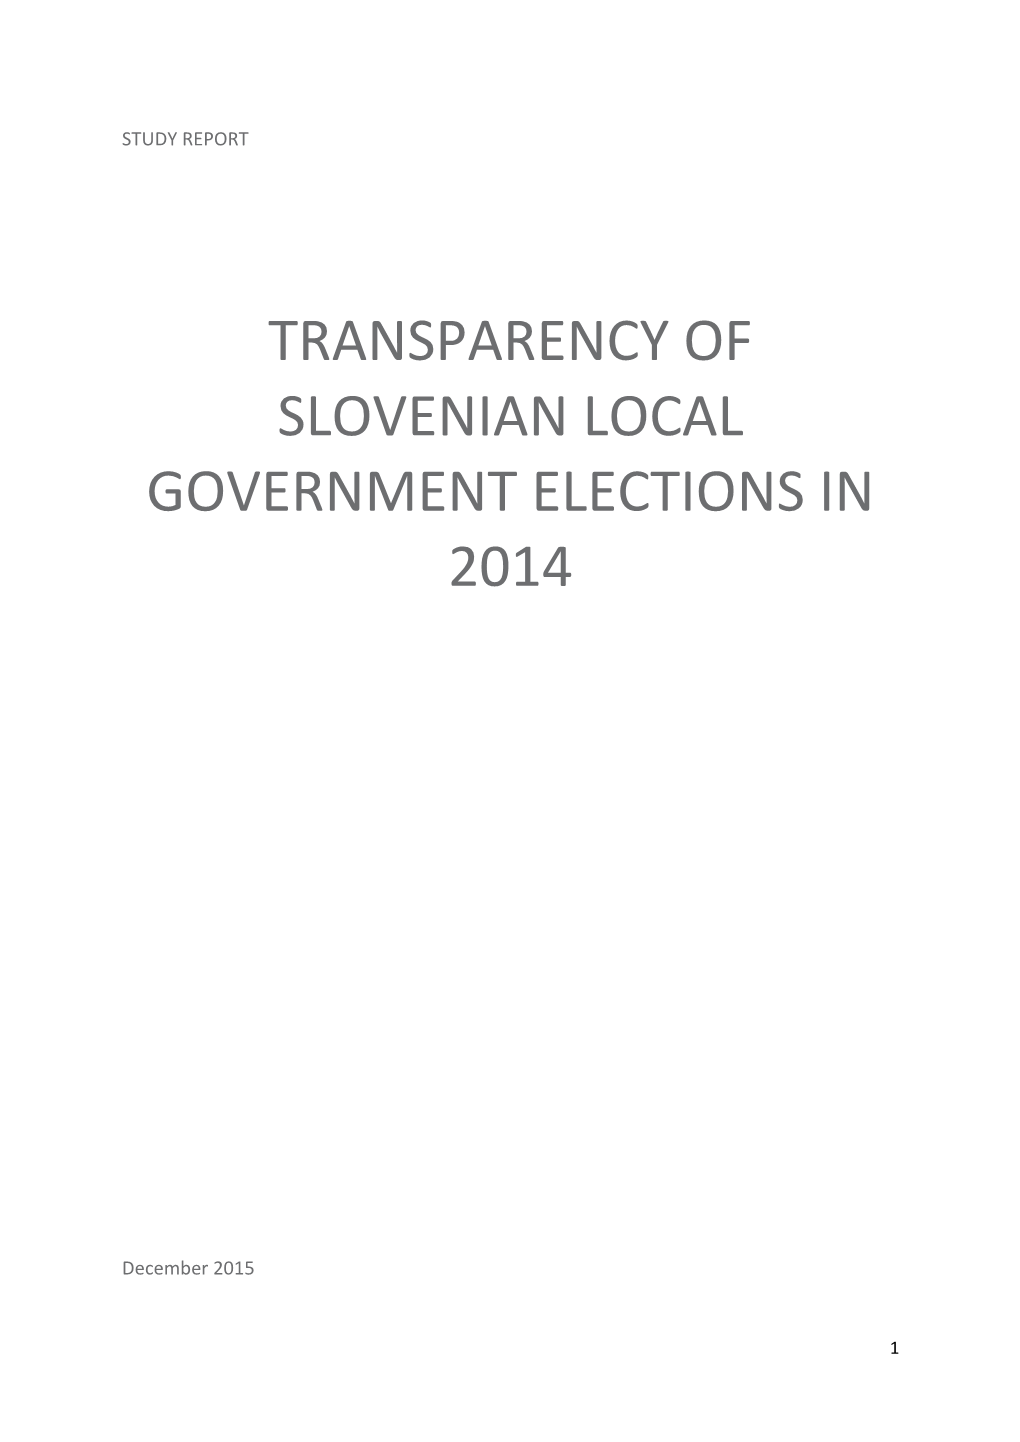 Transparency of Slovenian Local Government Elections in 2014